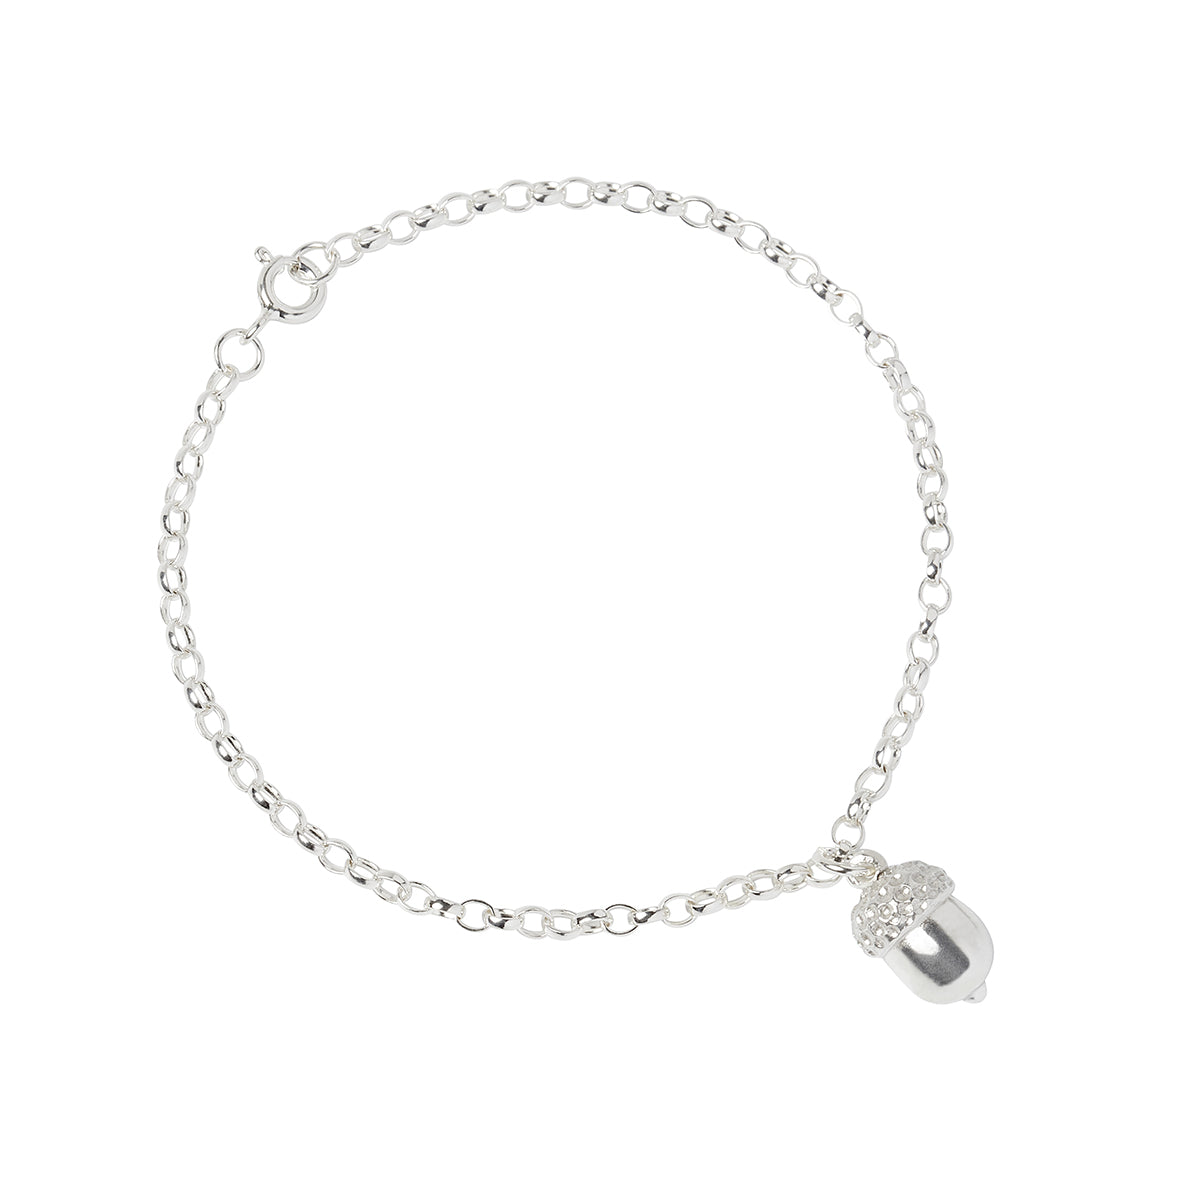 A solid sterling silver acorn charm in the centre of an oval belcher chain bracelet  on a white background. The Acorn is a symbol of strength and new beginnings. Handmade by Kirsty Taylor Jewellery in Corbridge Northumberland